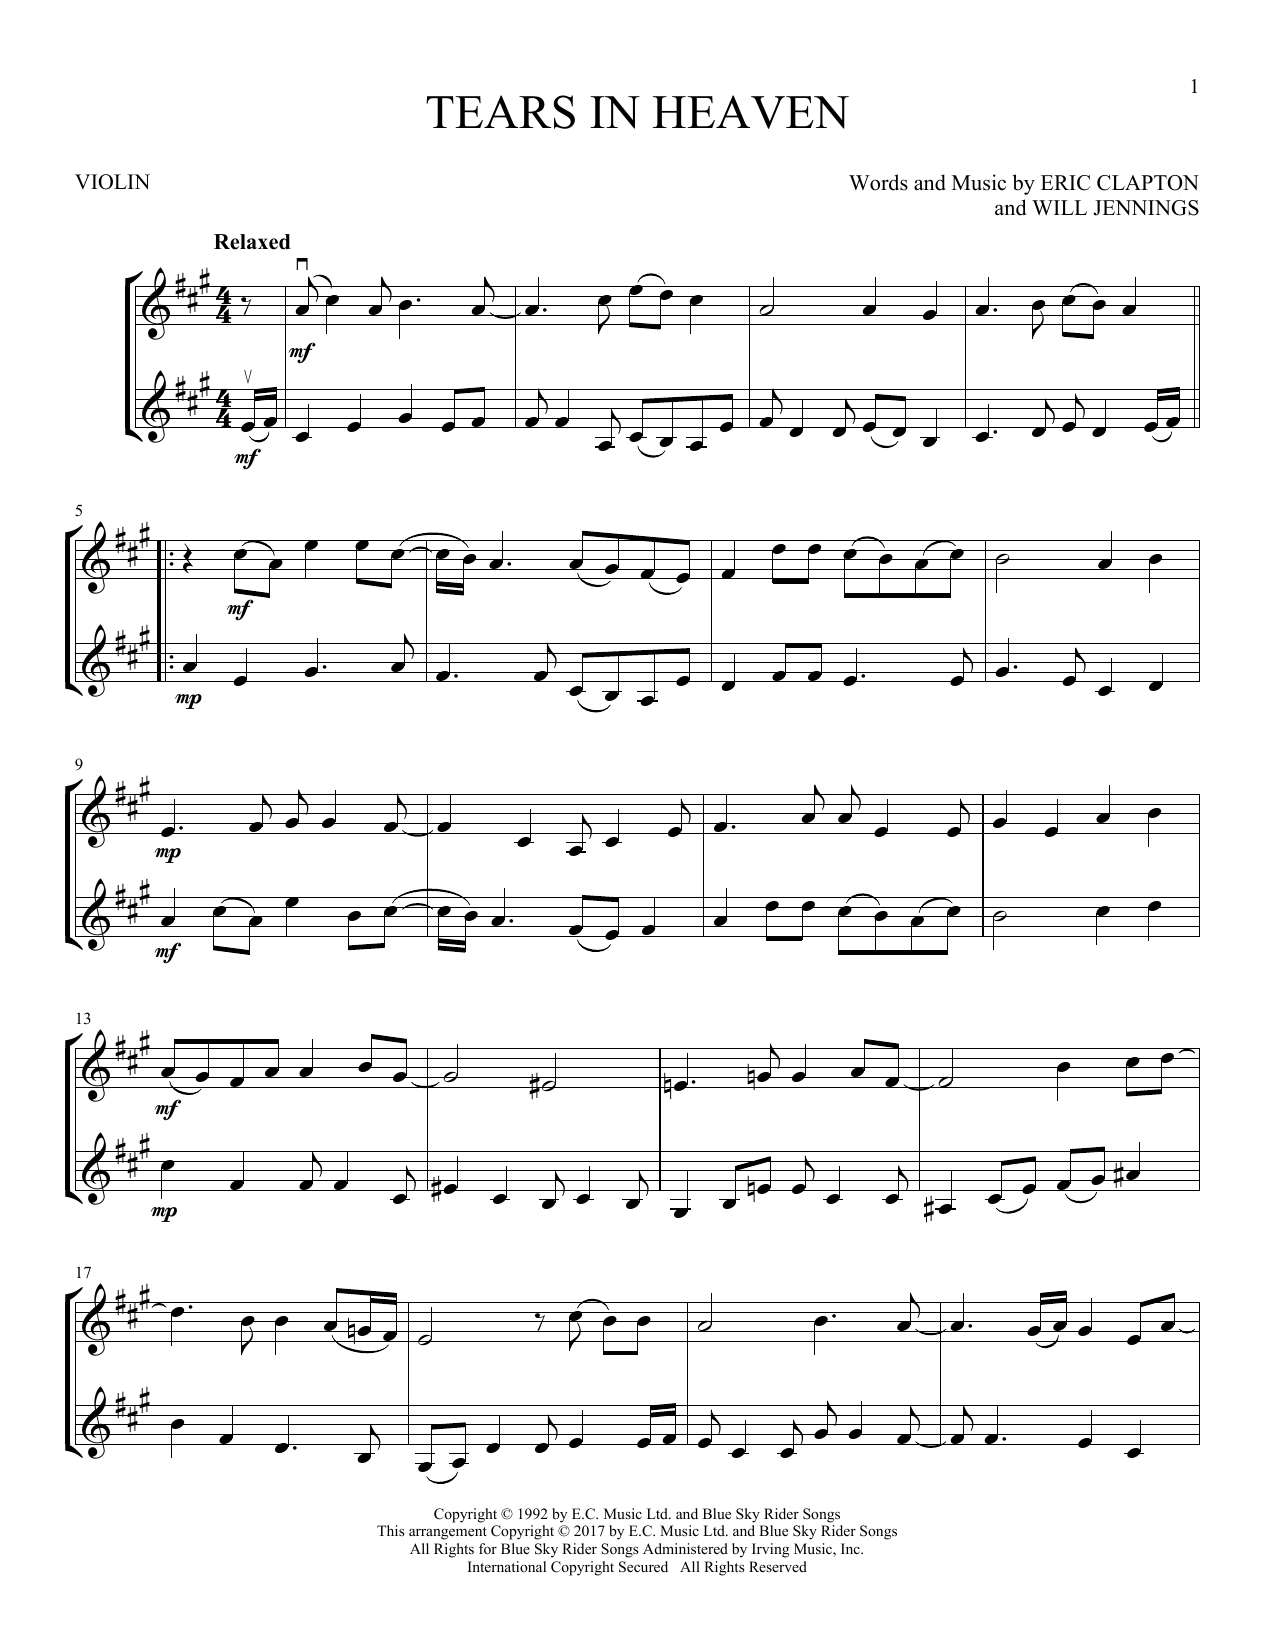 Tears In Heaven Chords Eric Clapton Tears In Heaven Sheet Music Notes Chords Download Printable Vlndt Sku 253145